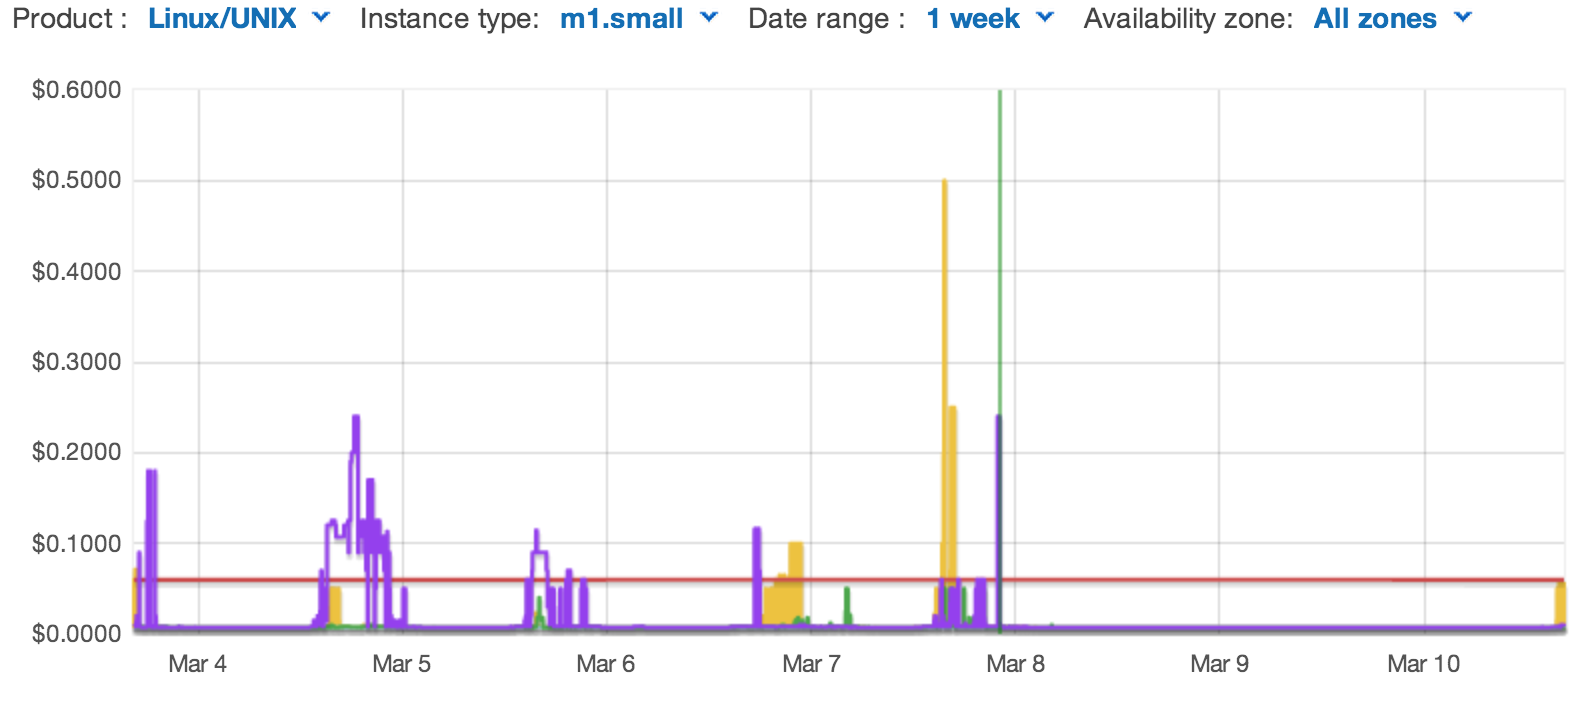 Sample spot price history graph from AWS management console